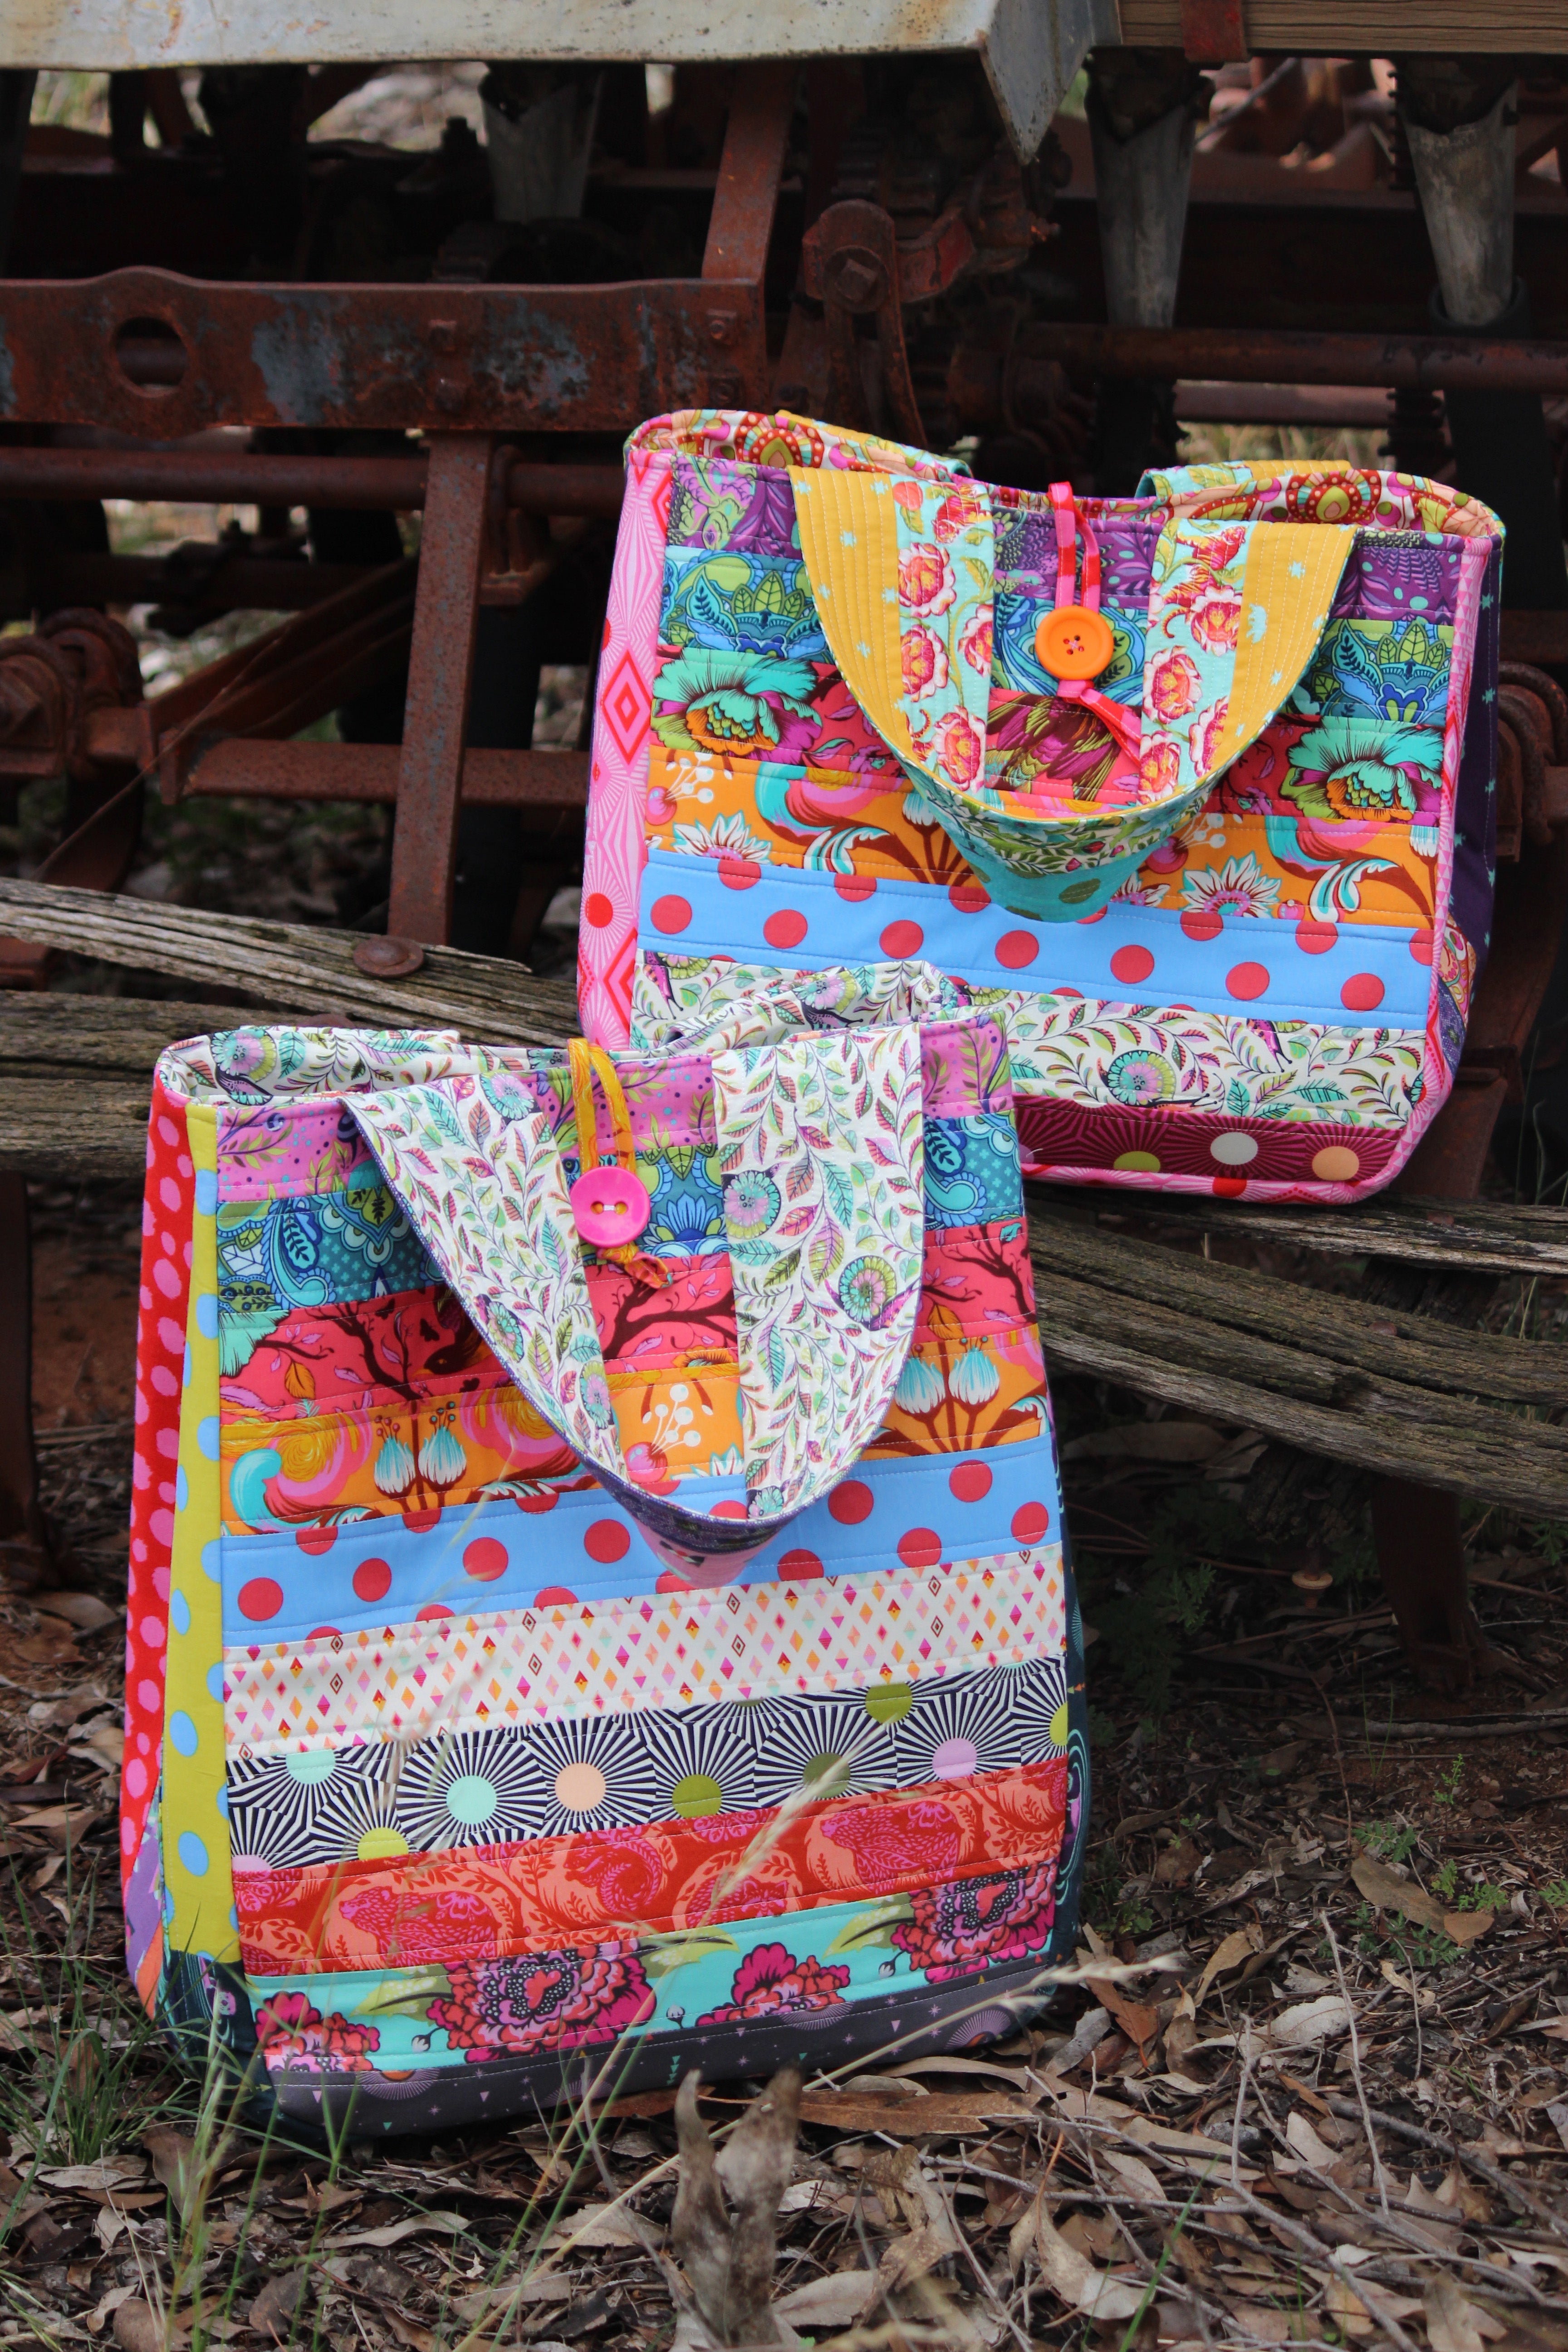 Bon Voyage Tote Bag Pattern and Project Bag Pattern By Annie